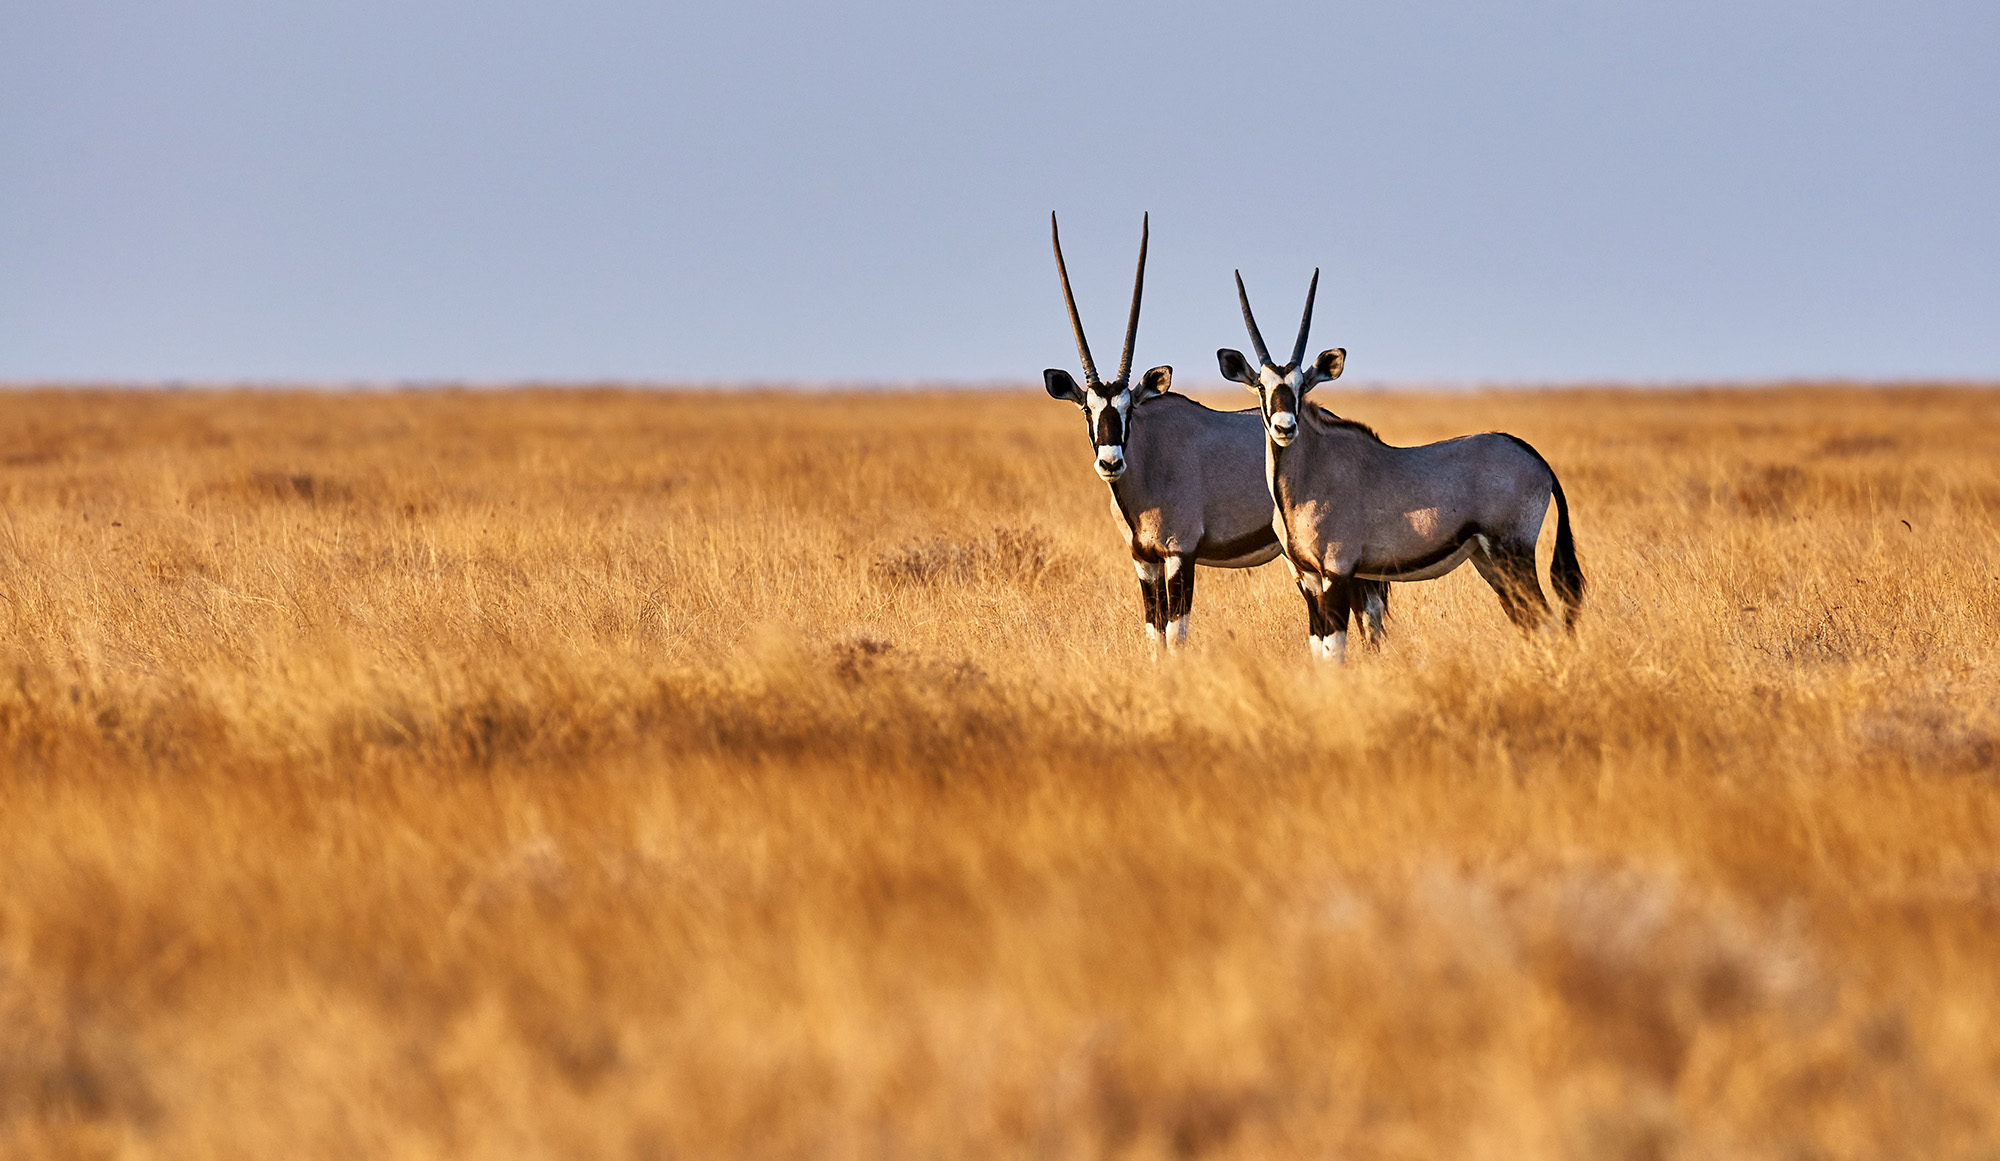 See the Abundant Wildlife and Wilderness of Namibia